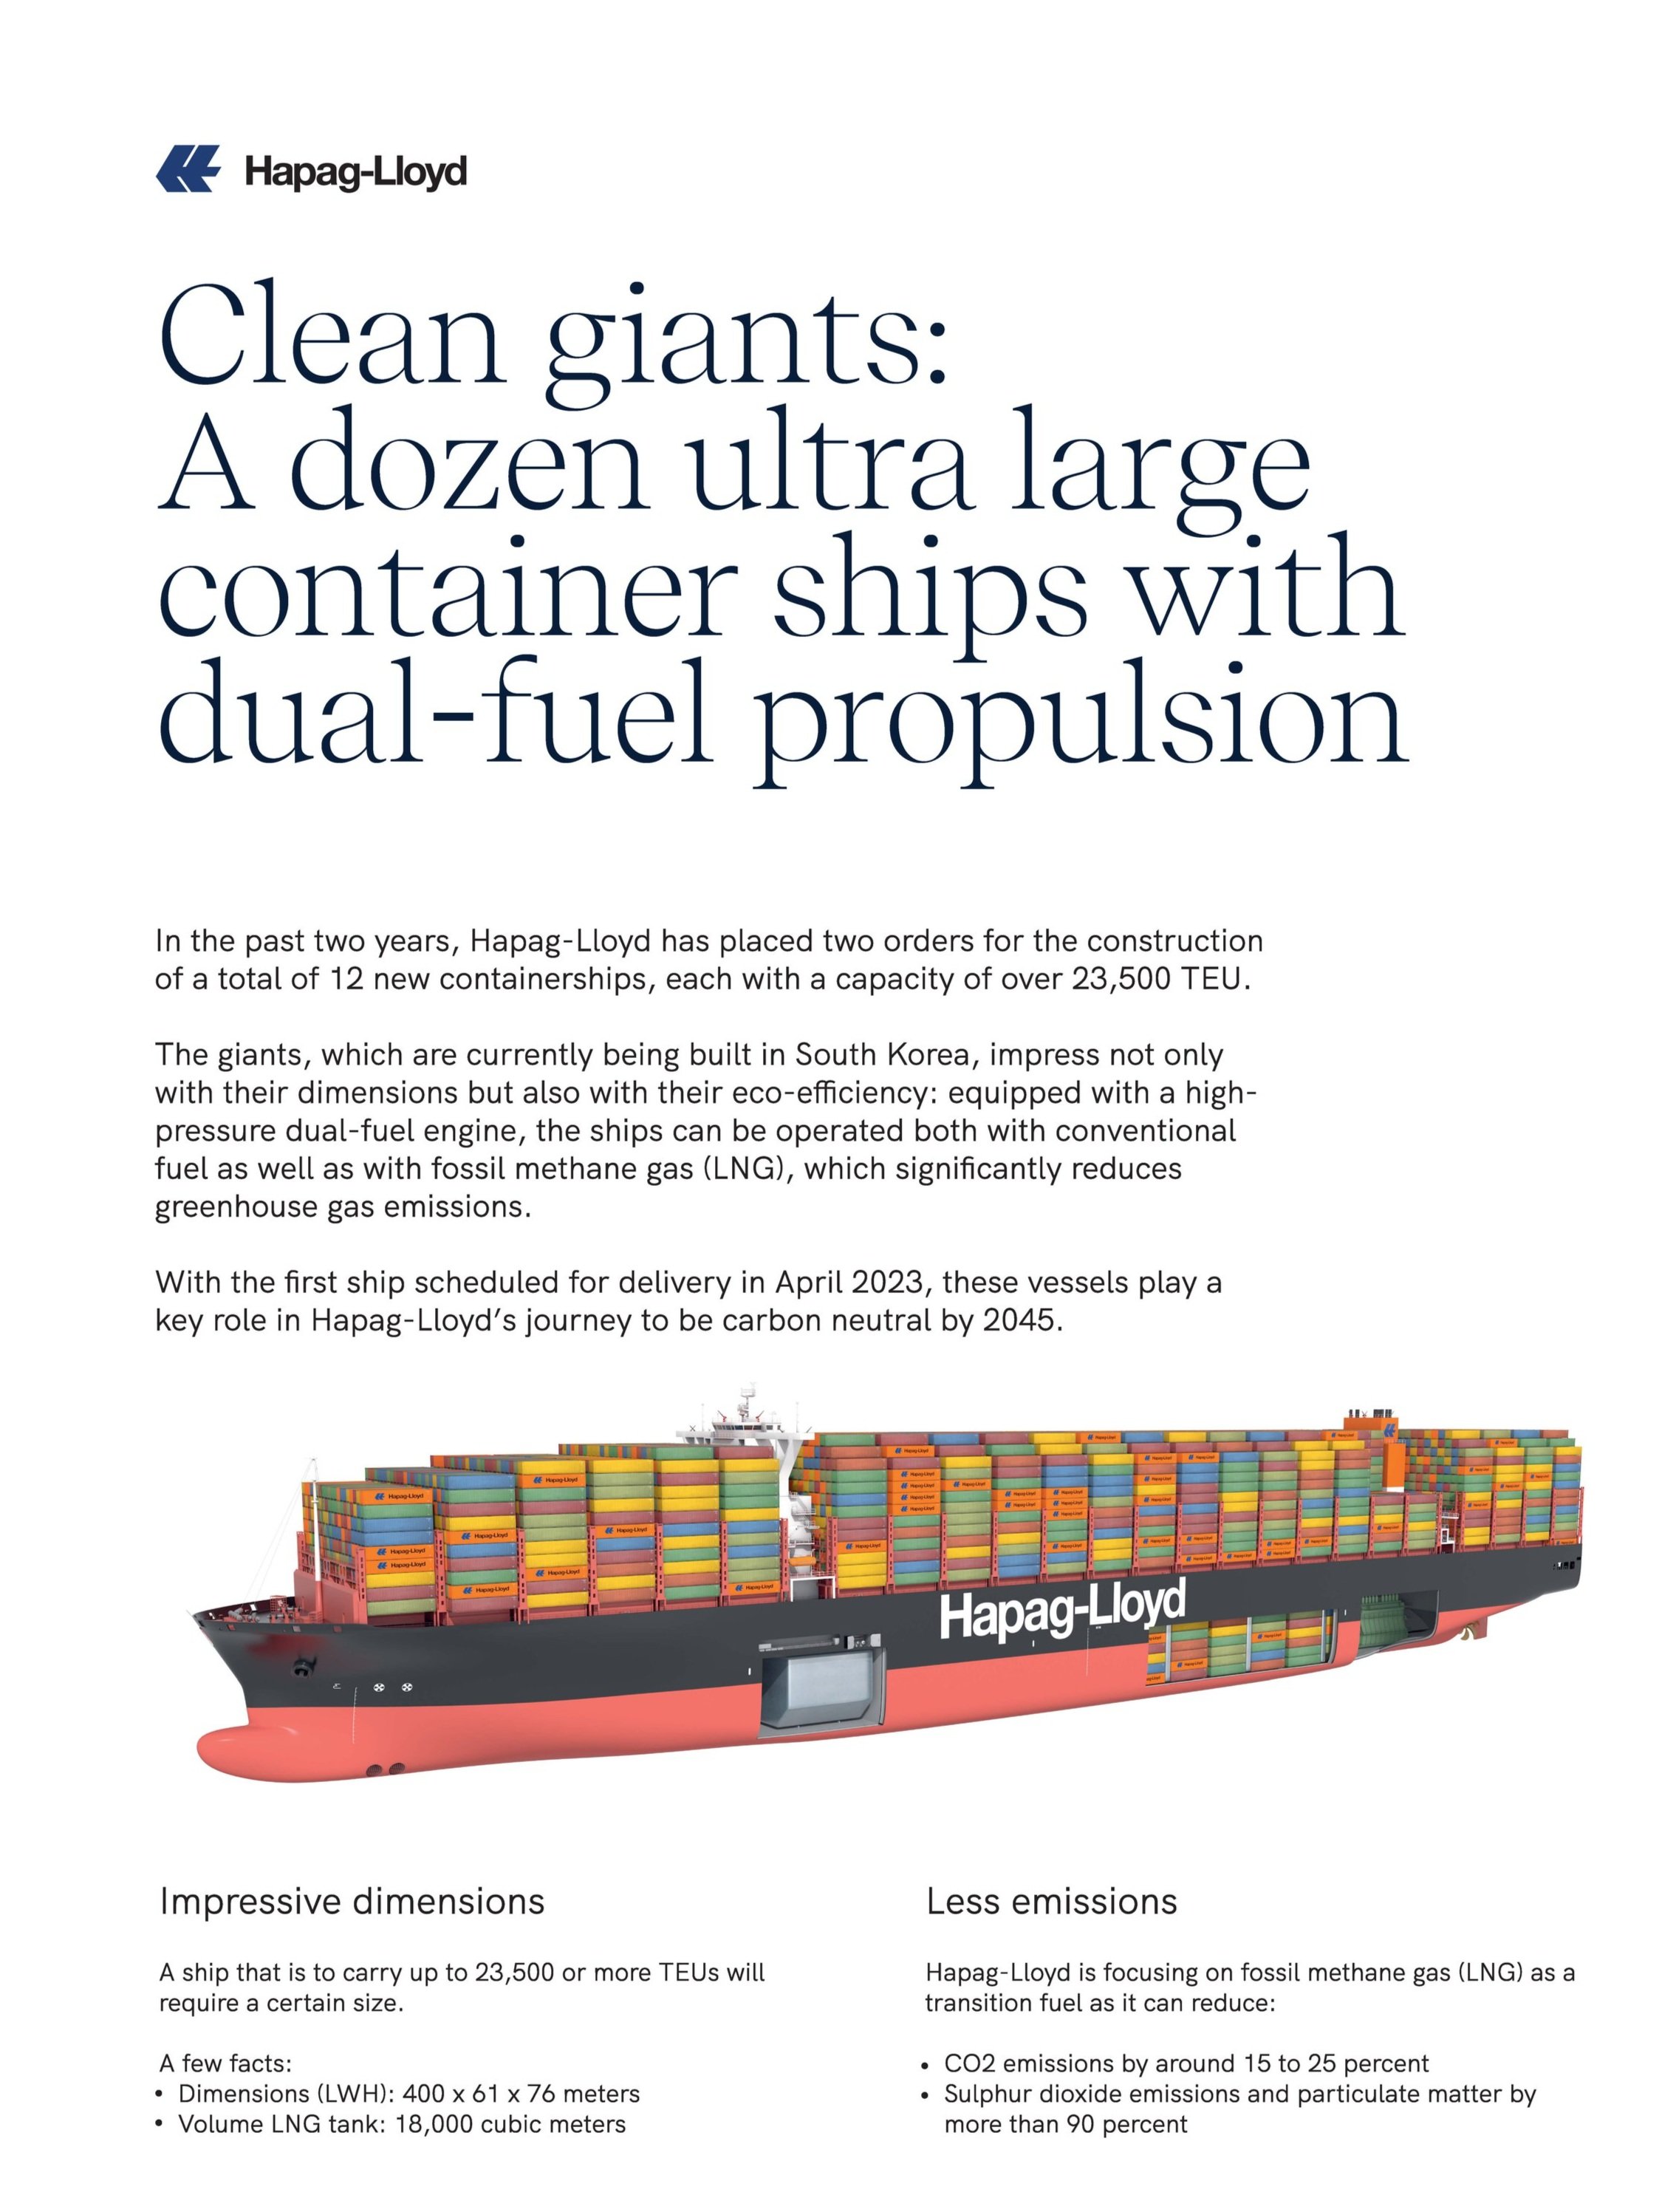 Clean giants: a dozen ultra large container ships with dual-fuel propulsion